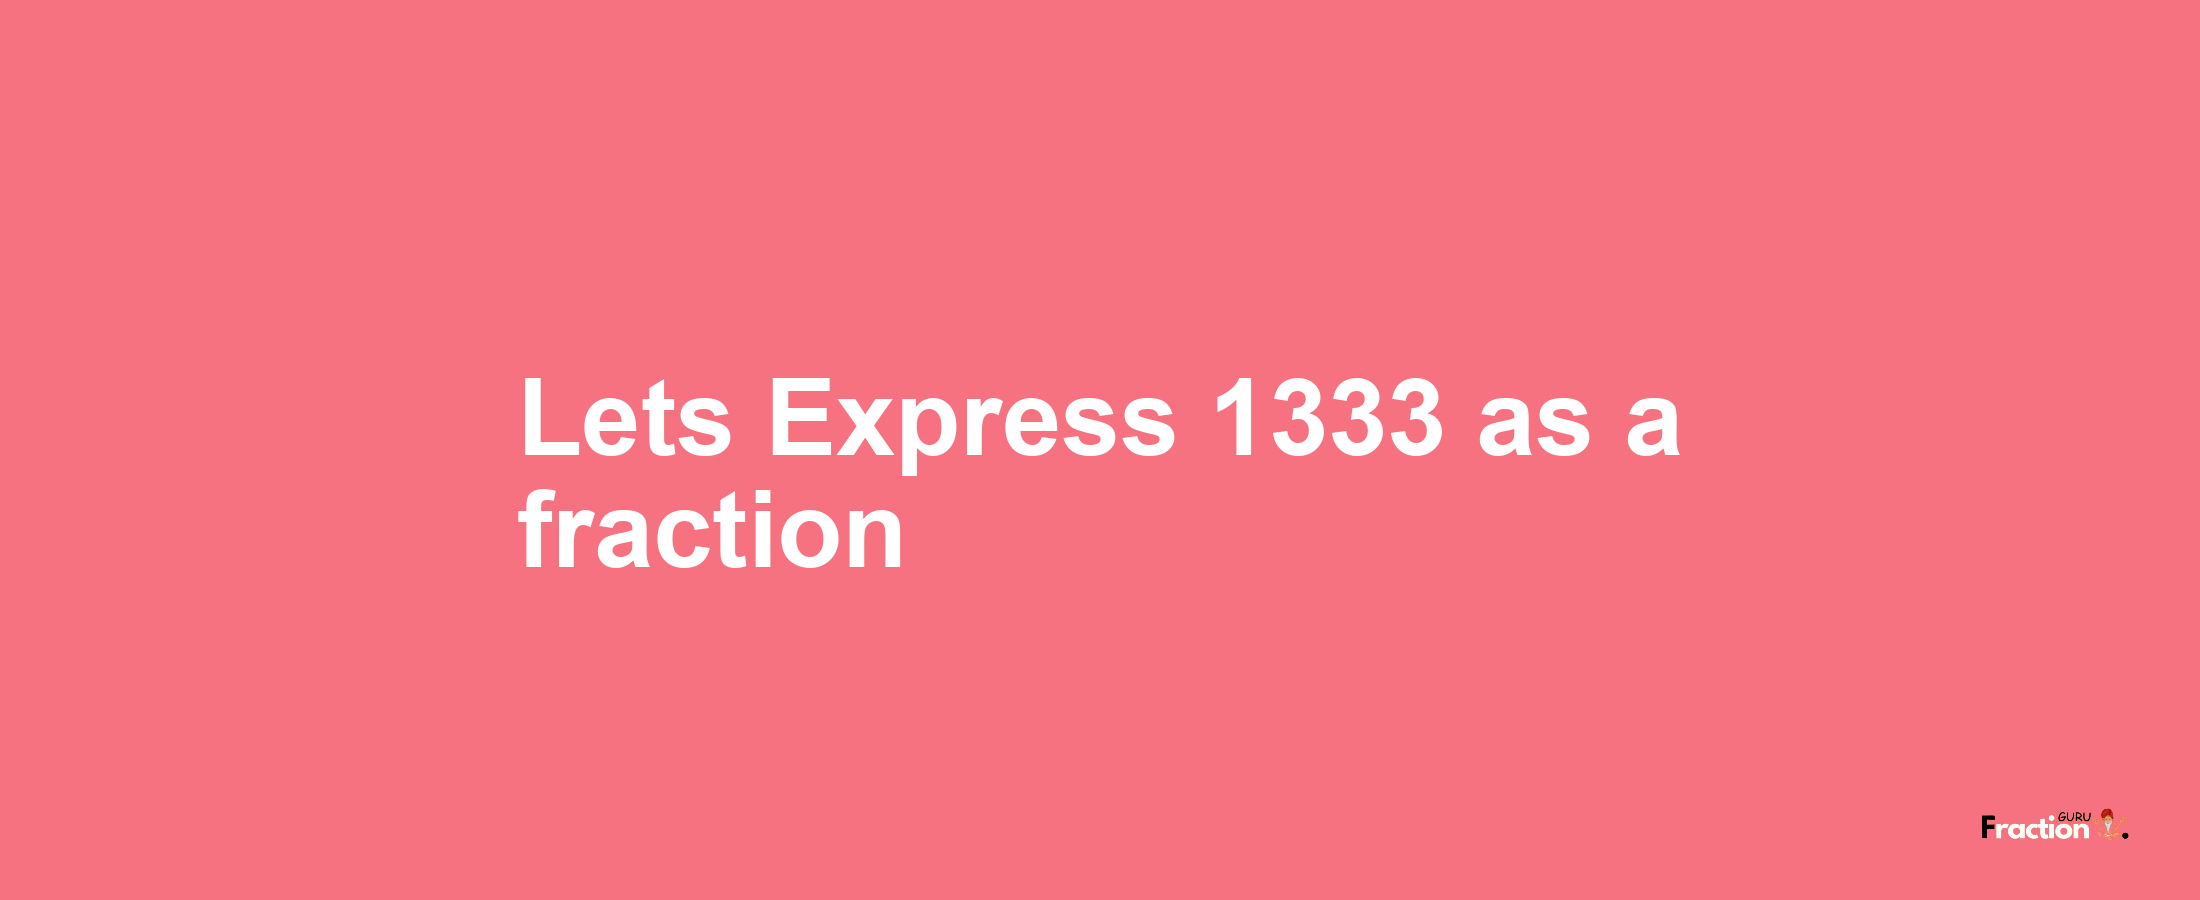 Lets Express 1333 as afraction